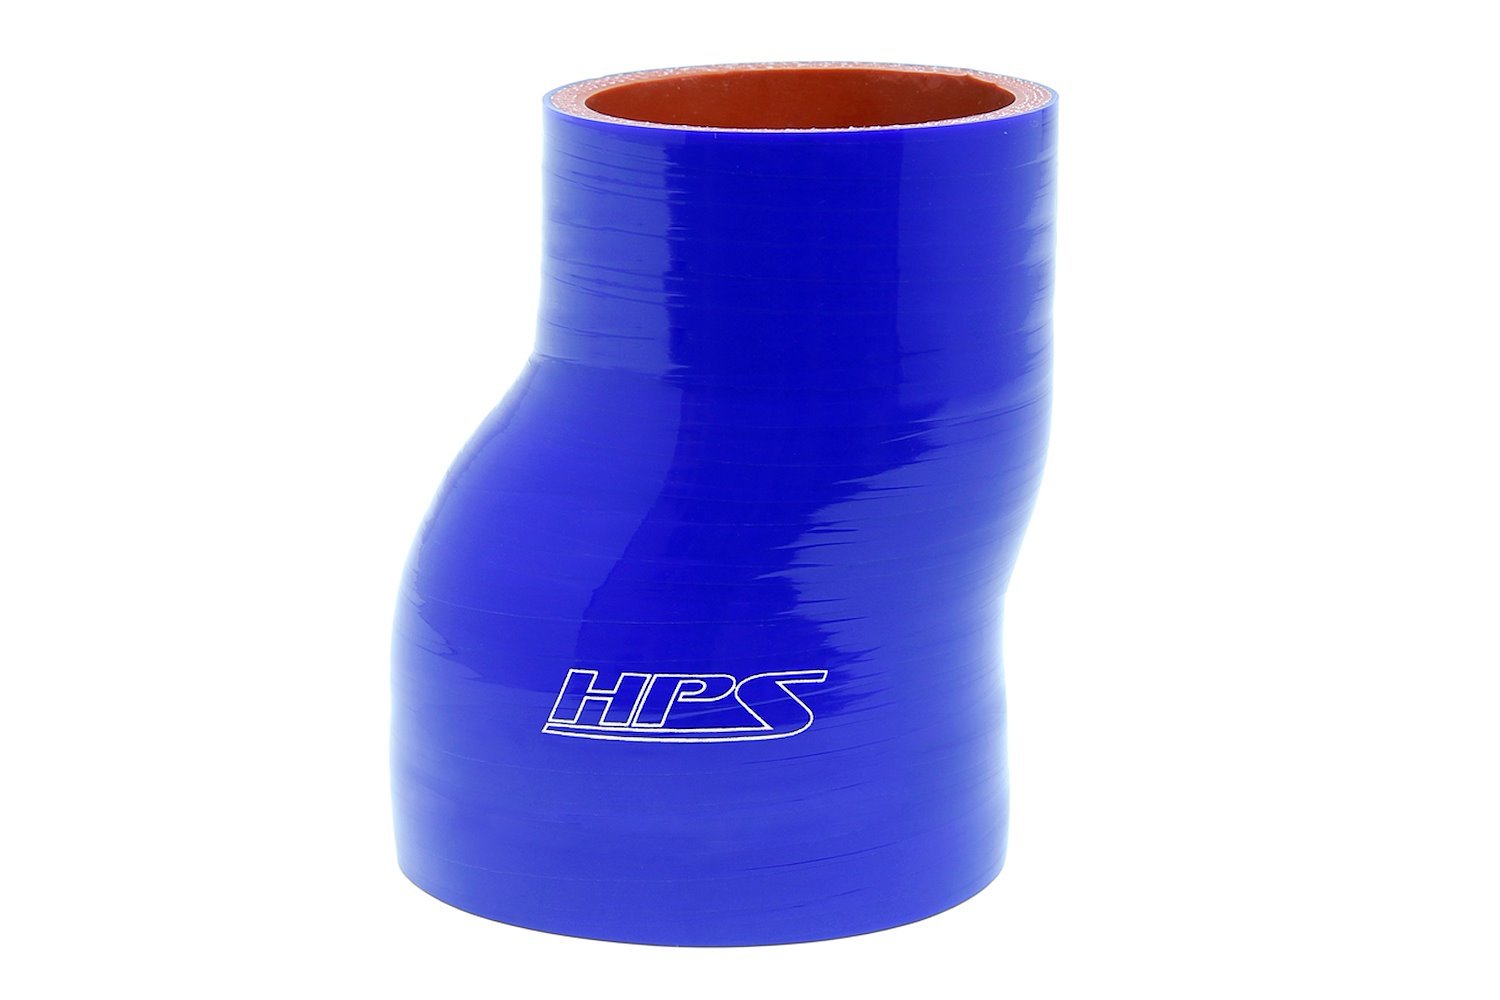 HTSOR-400-450-L6-BLUE Offset Reducer, High-Temp 4-Ply Reinforced, 4 in. ID To 4 1/2 in. ID, 6 in. Length.